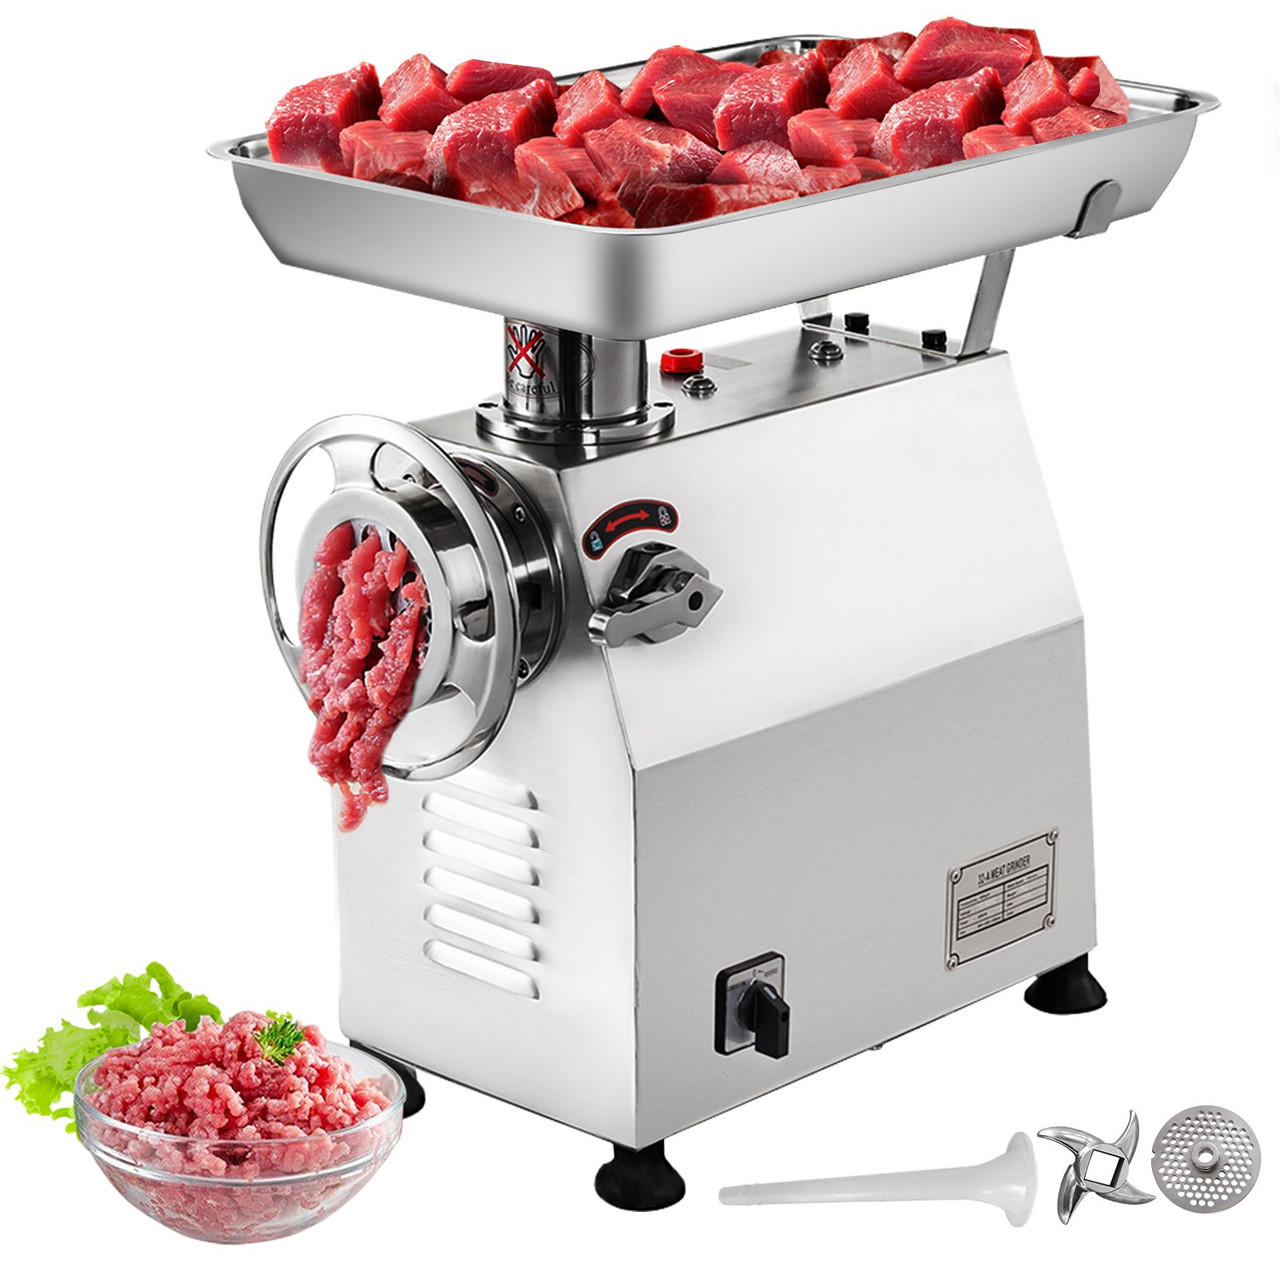 Commercial Meat Grinder 770lbs/h Electric Sausage Maker 2200W Stainless Steel With 2 Grinding Heads & 2 Blades For Restaurants, Supermarkets, Fast Food Stores, Butcher Shops,Silver